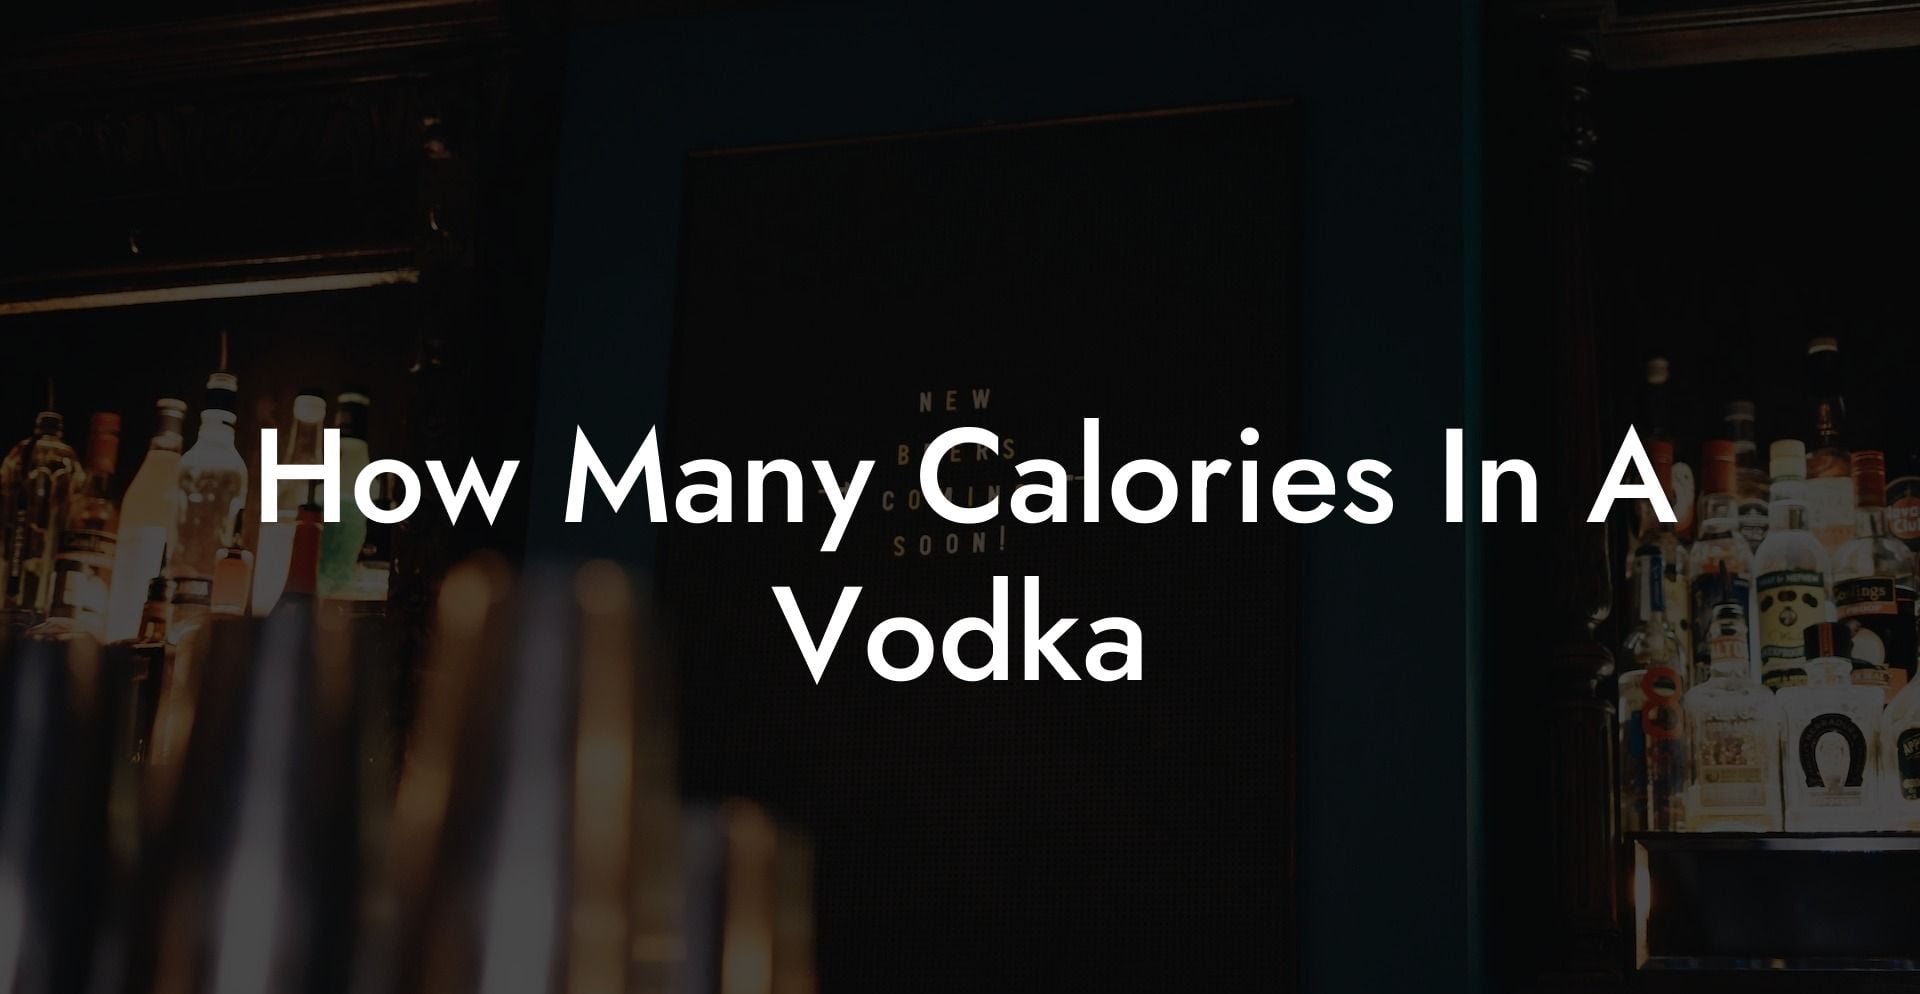 How Many Calories In A Vodka